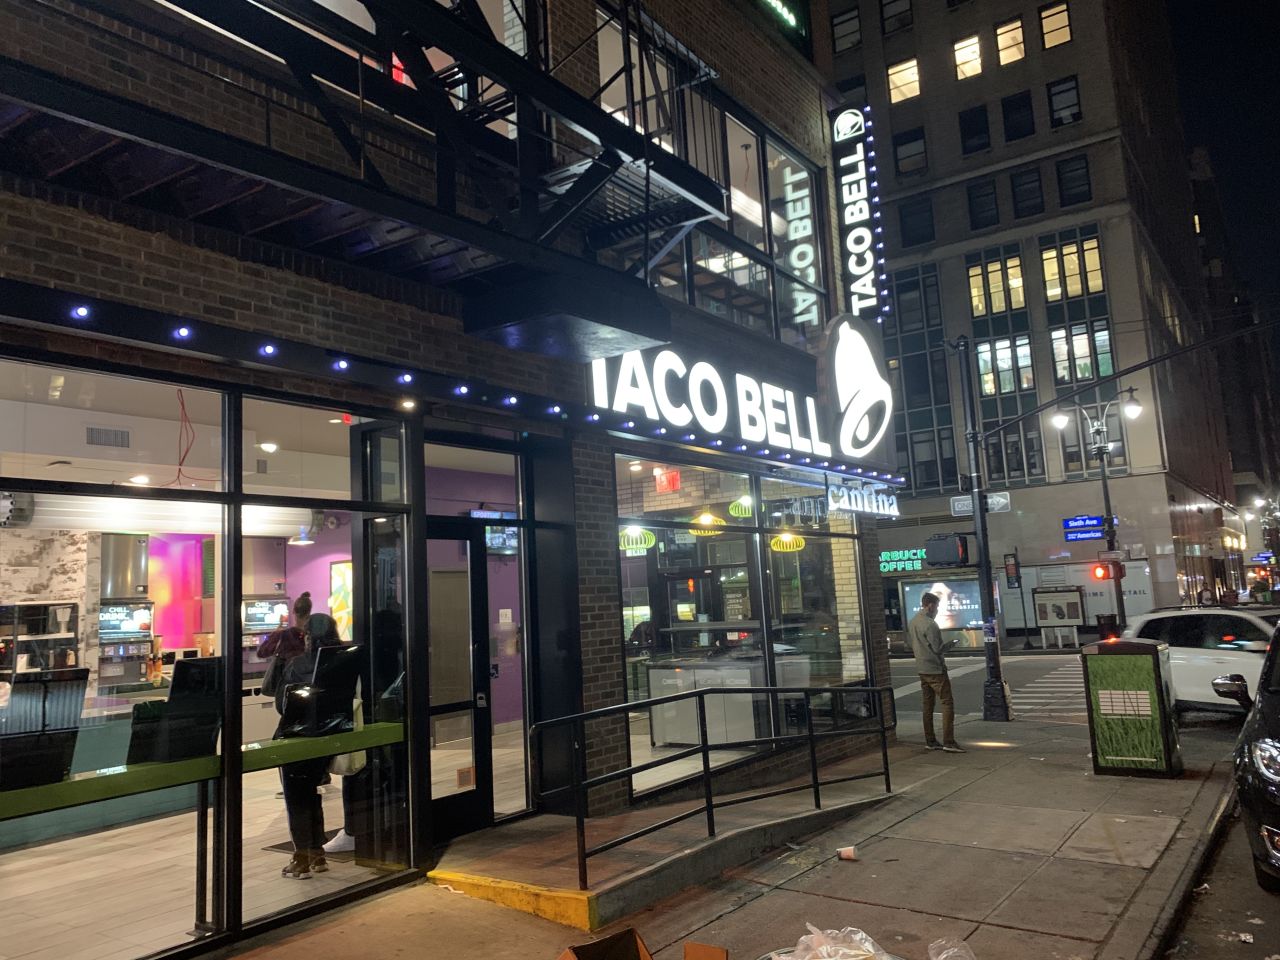 Diners who choose to eat outdoors at Keens have a view of this Taco Bell Cantina.